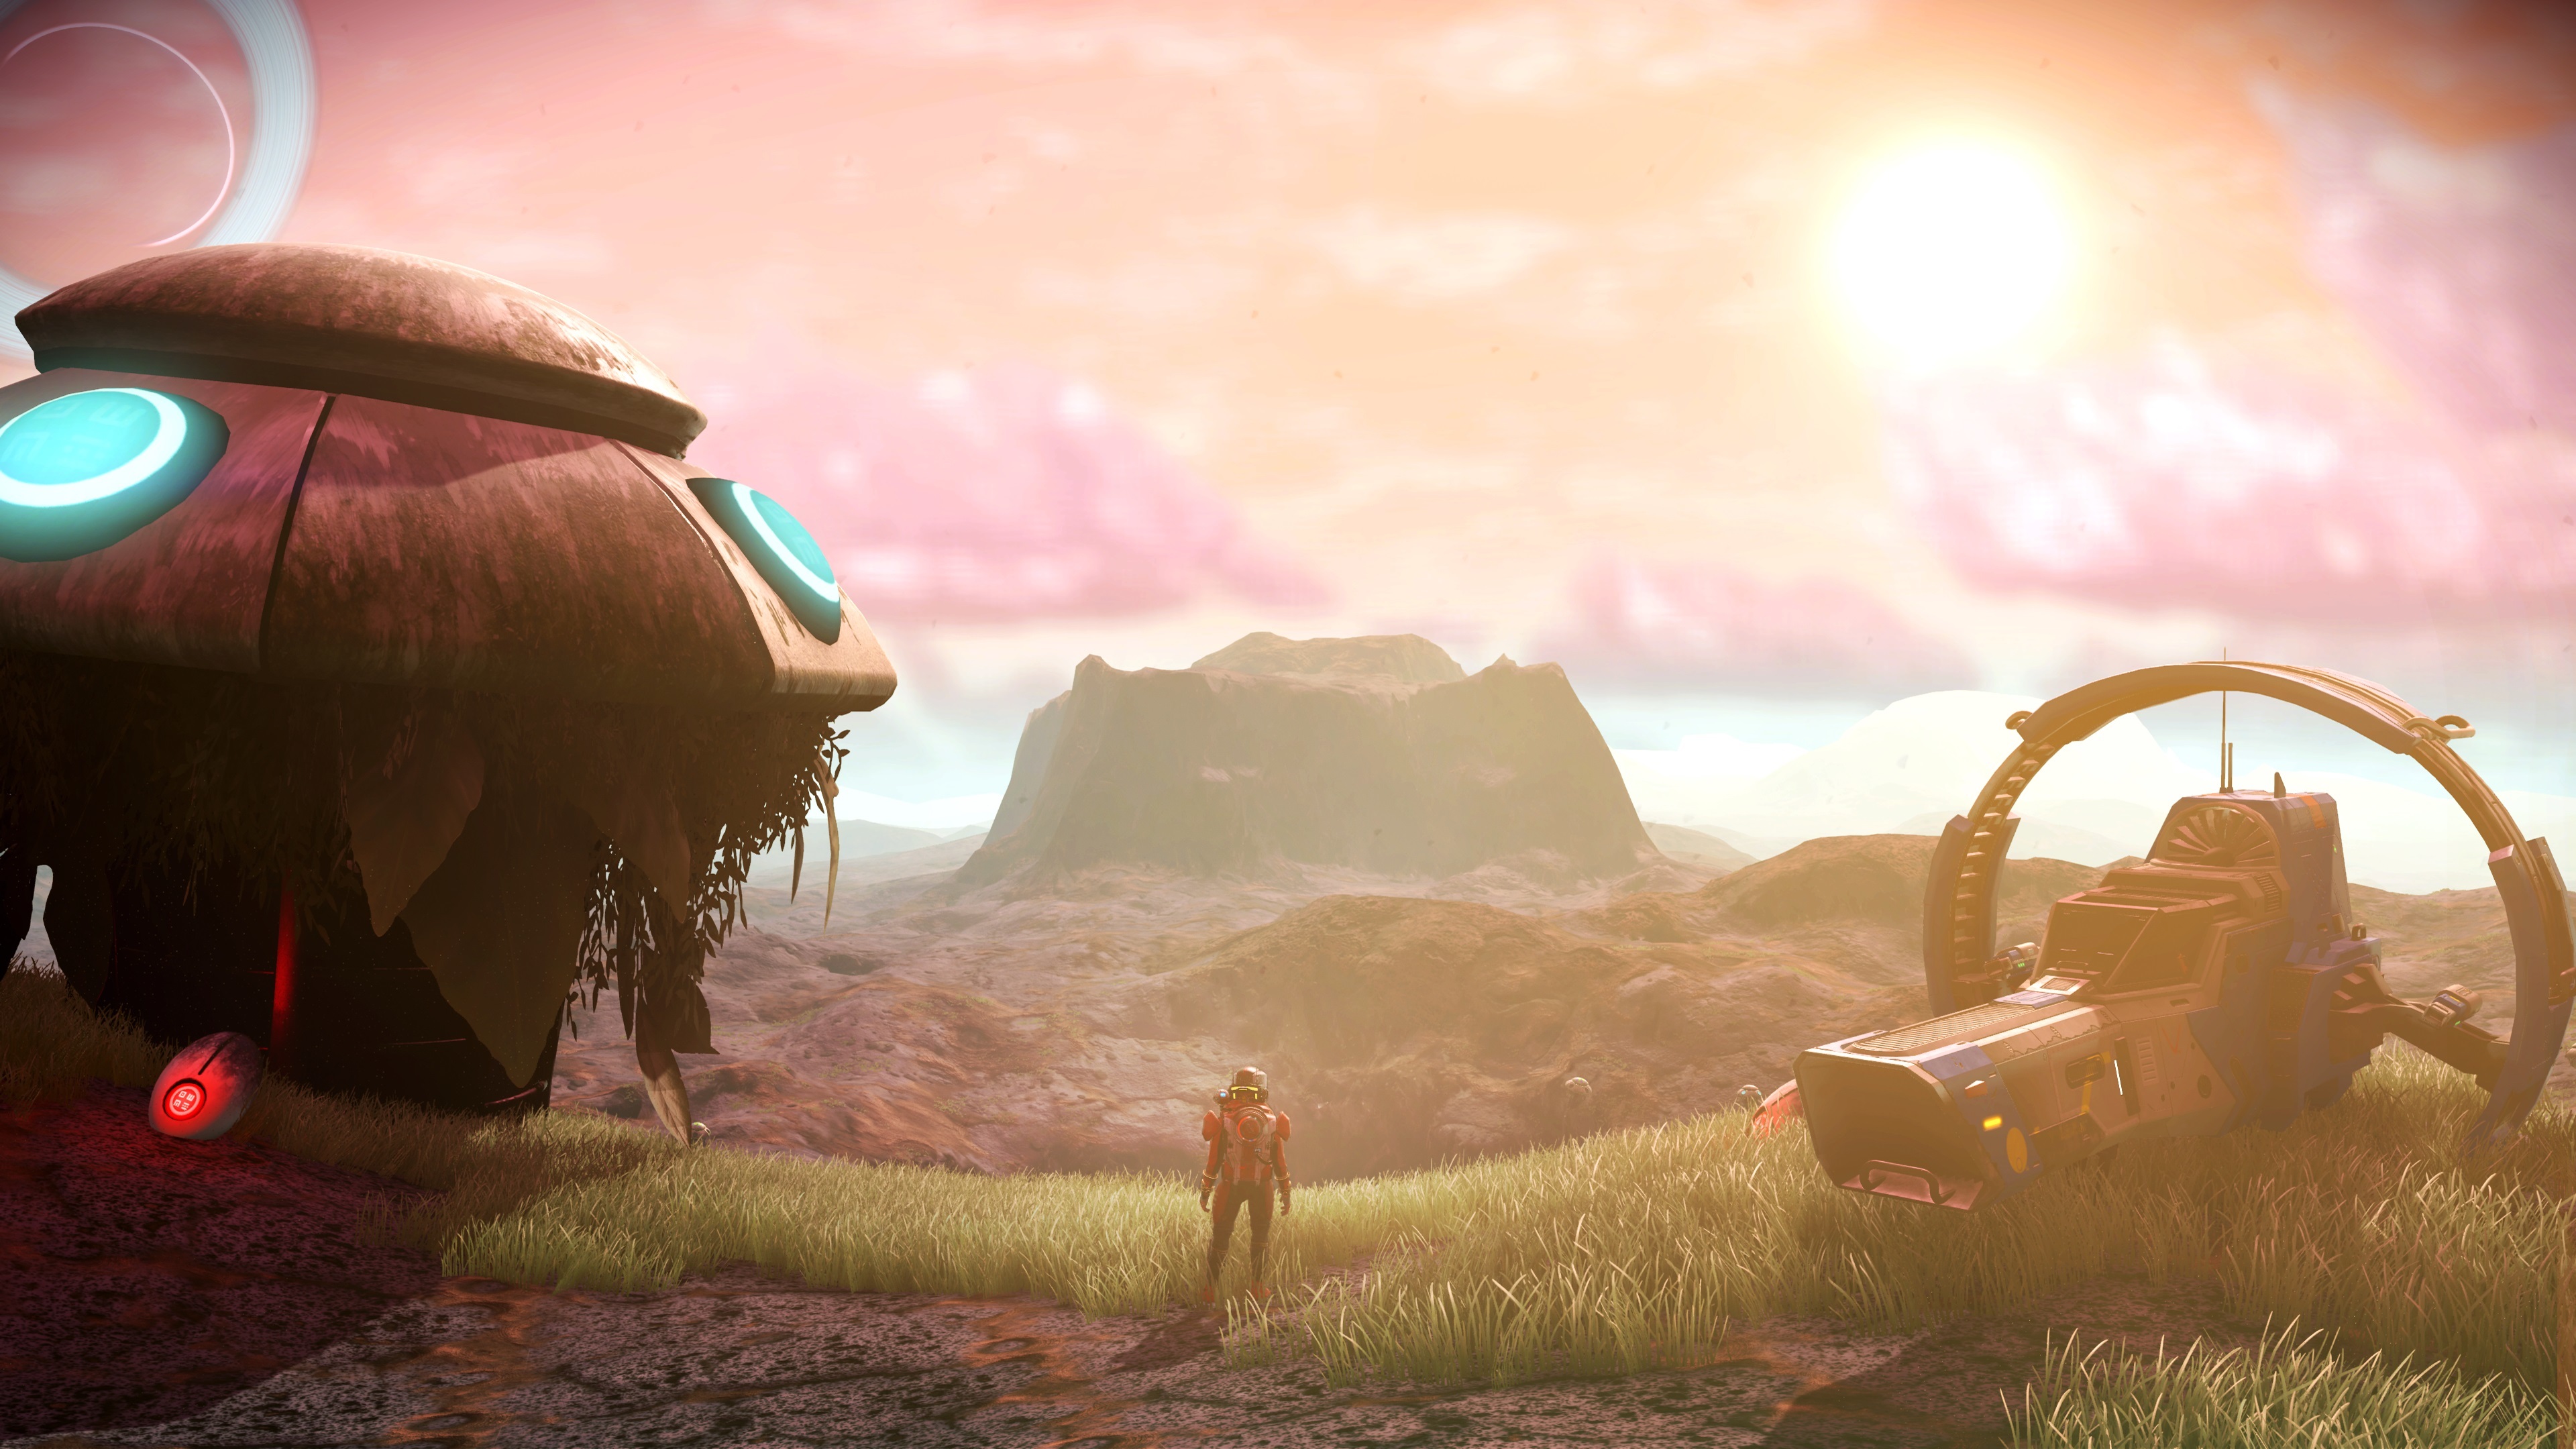 No Mans Sky Science Fiction Spaceship Video Games Planet Landscape Clouds In Game Screen Shot Grass  3840x2160